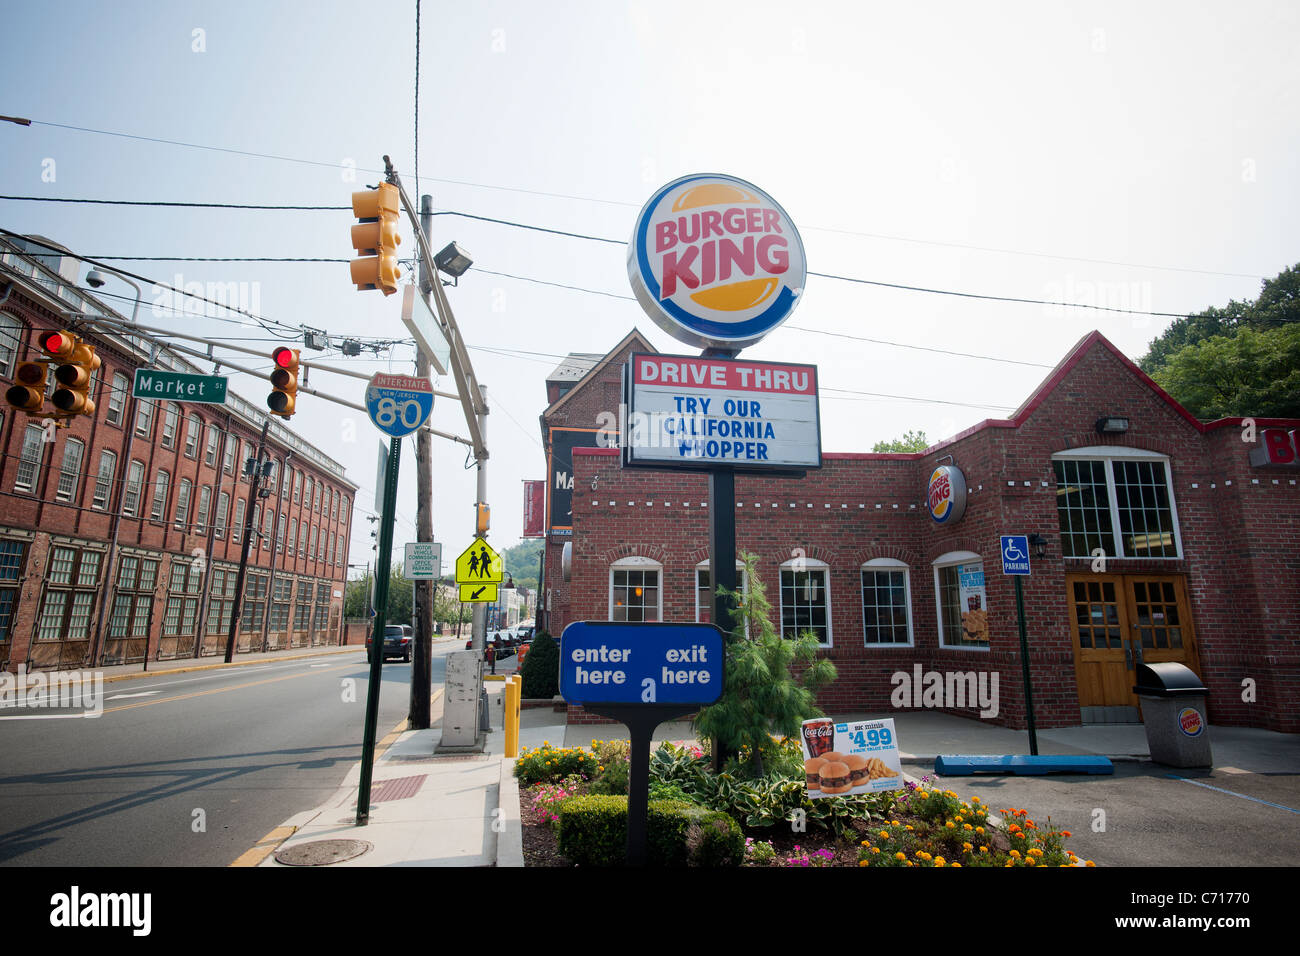 A Burger King restaurant in the Great Falls Historic District in Paterson, NJ Stock Photo